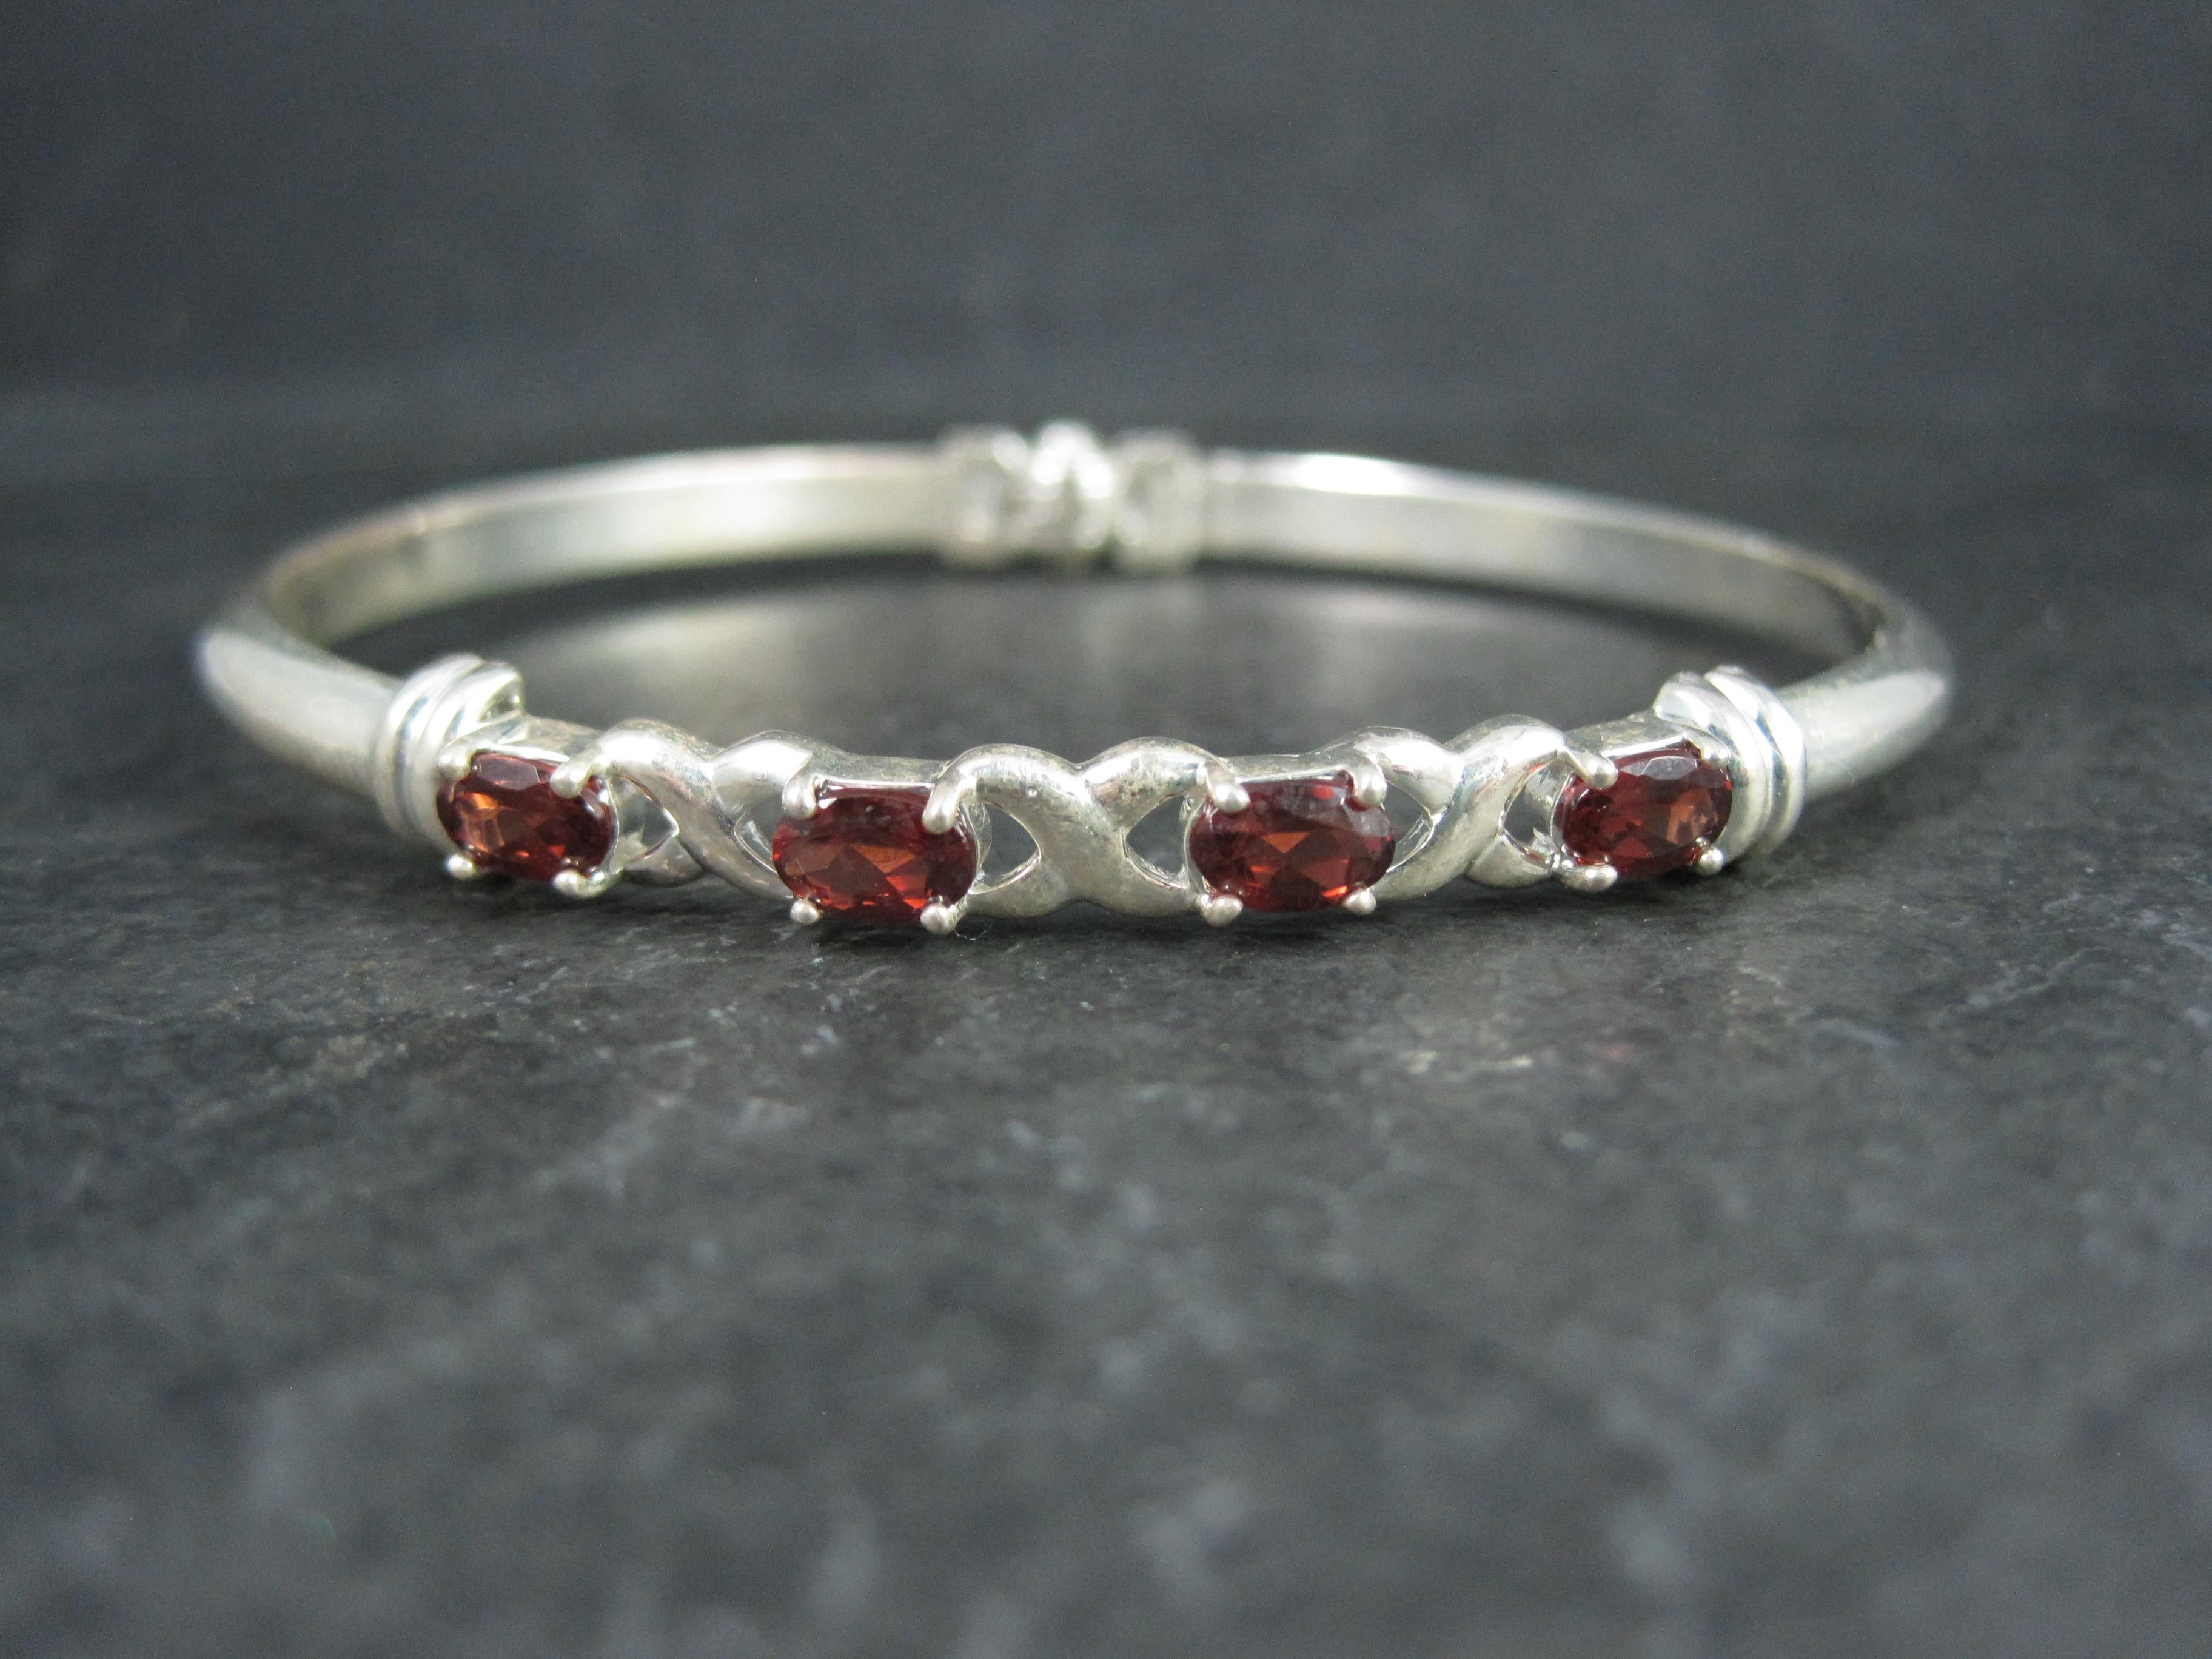 This beautiful estate bangle bracelet is sterling silver with 4 oval cut 4x6mm garnets set in an XO pattern.

The face of this bracelet measures 1/4 of an inch wide.
It has an inner circumference of 7 1/2 inches and an inner diameter of 2 3/8